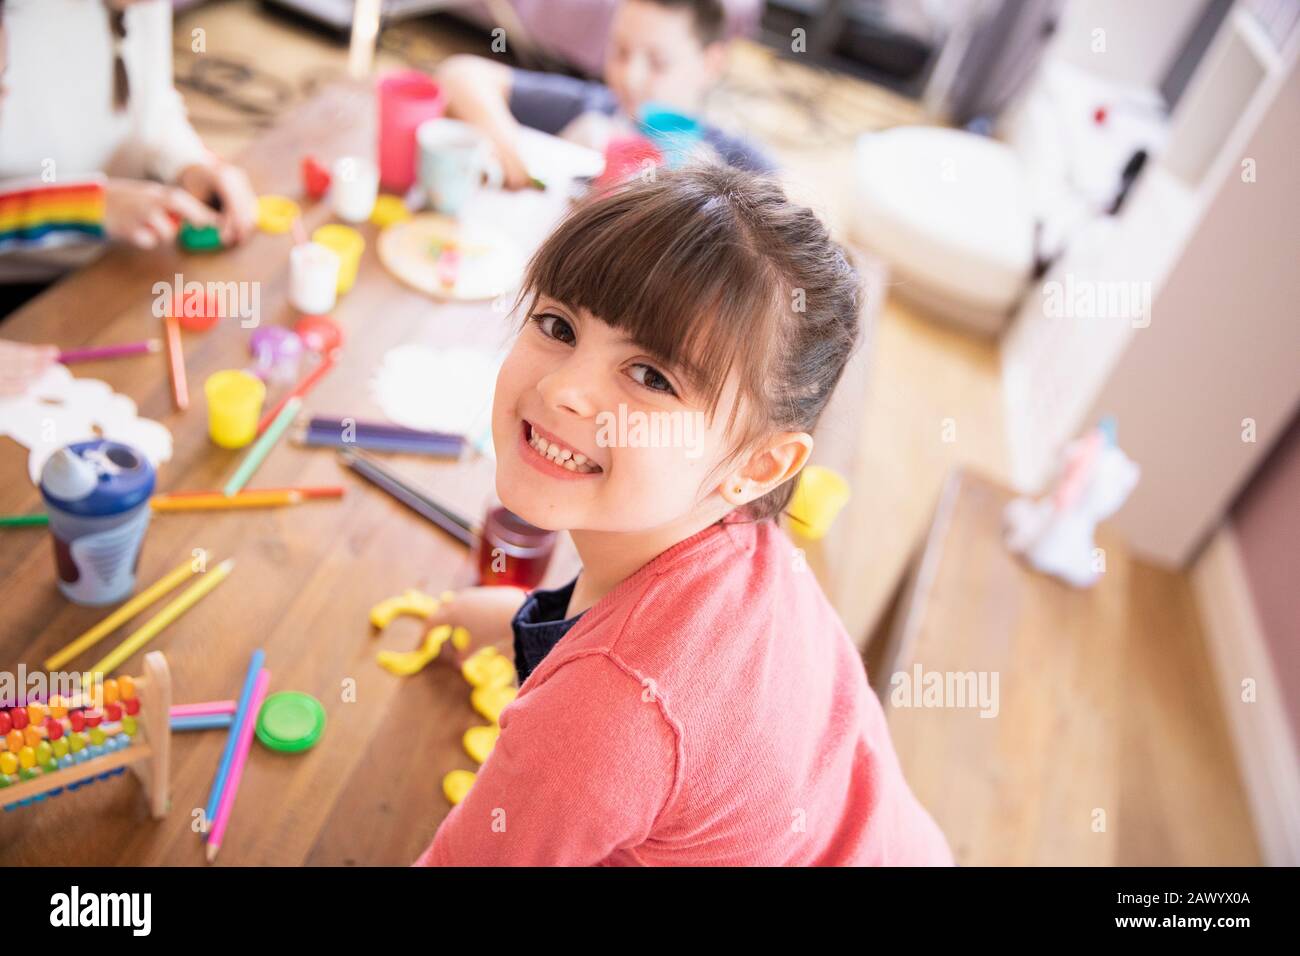 Portrait happy enthusiastic girl playing with toys at table Stock Photo